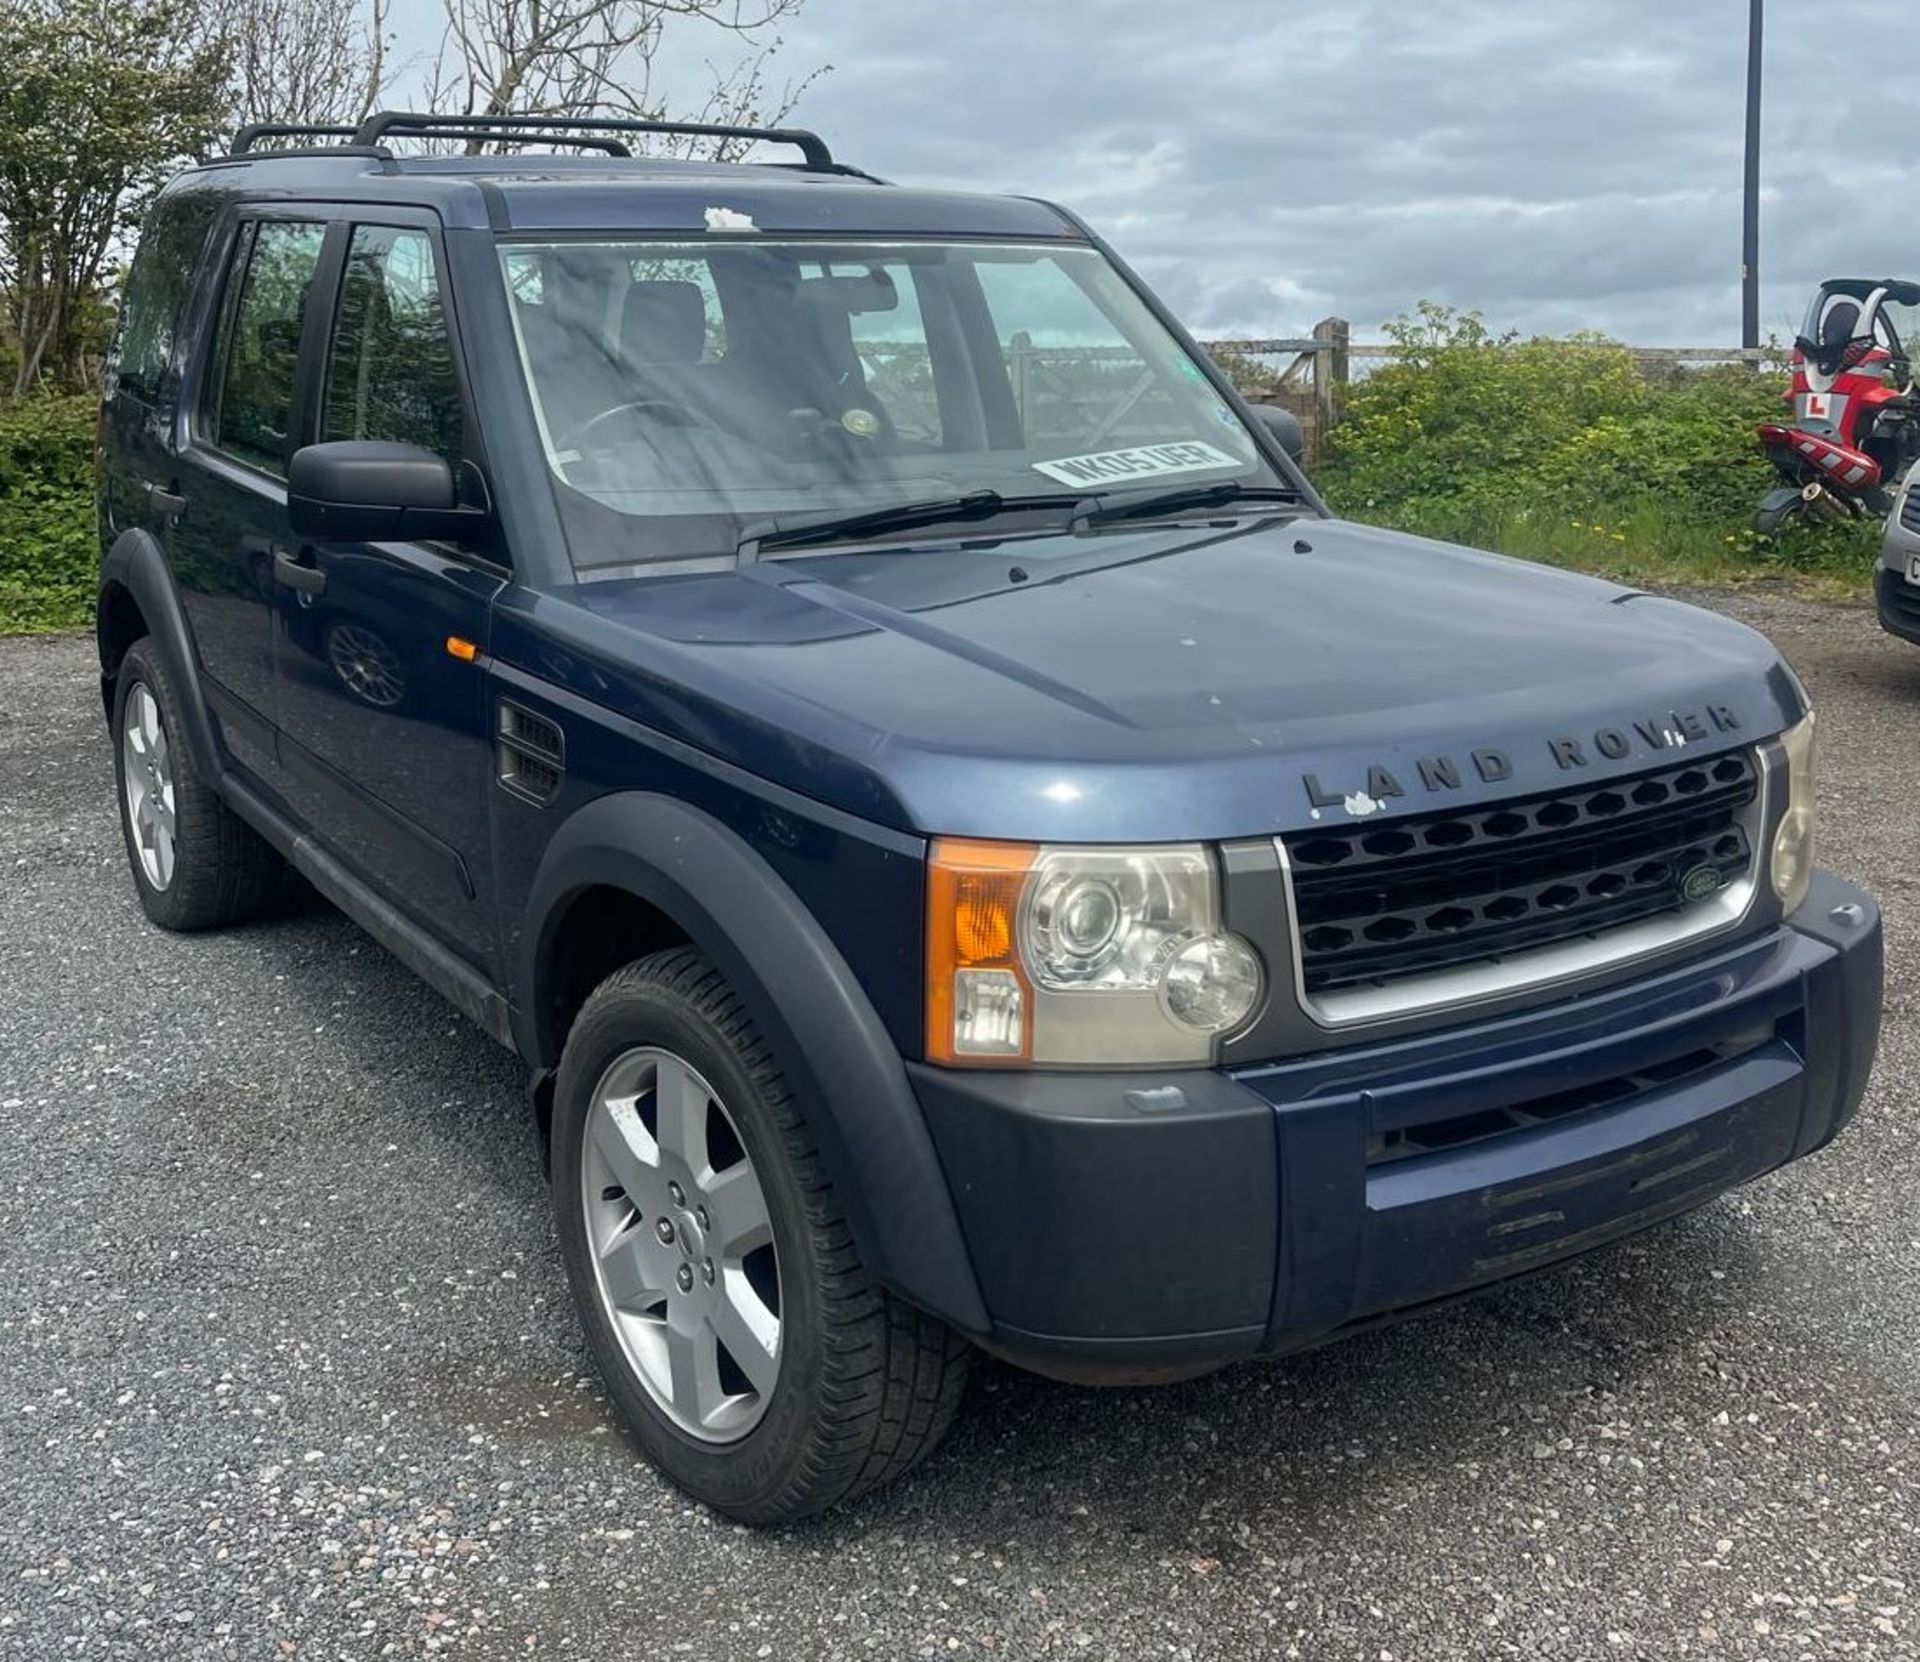 2005 Land Rover Discovery 3 Tdv6 S Auto - No Reserve - Image 2 of 14